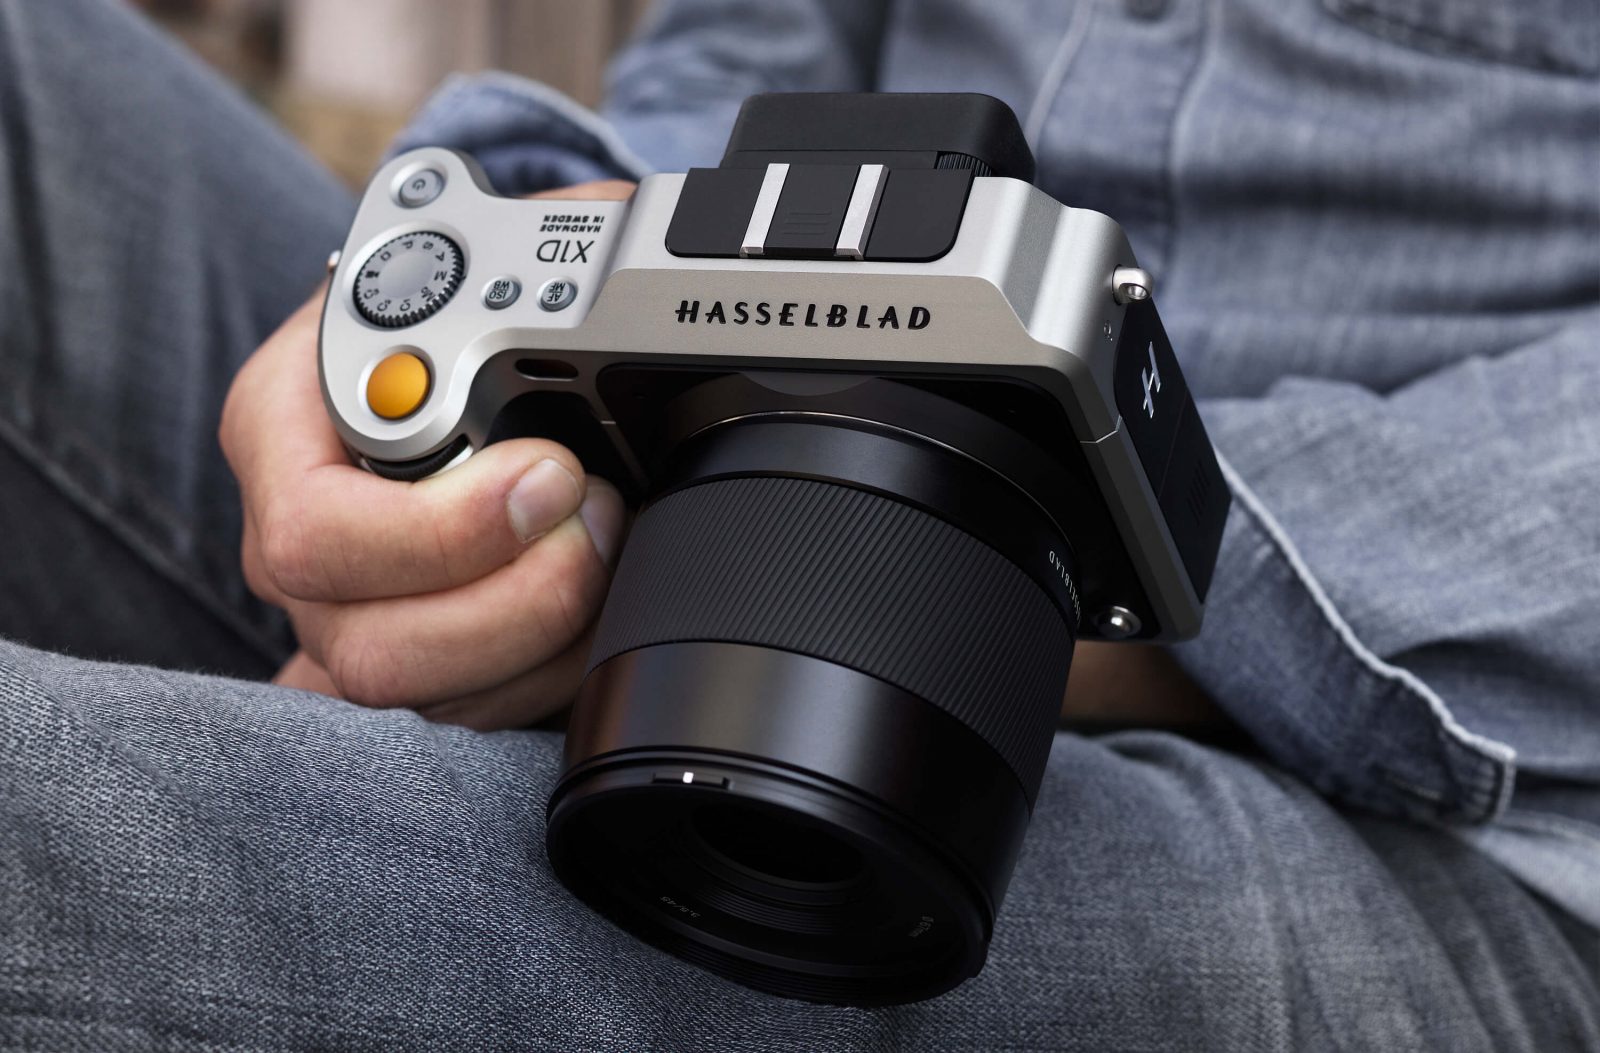 Come Try the Mirrorless Hasselblad X1D!